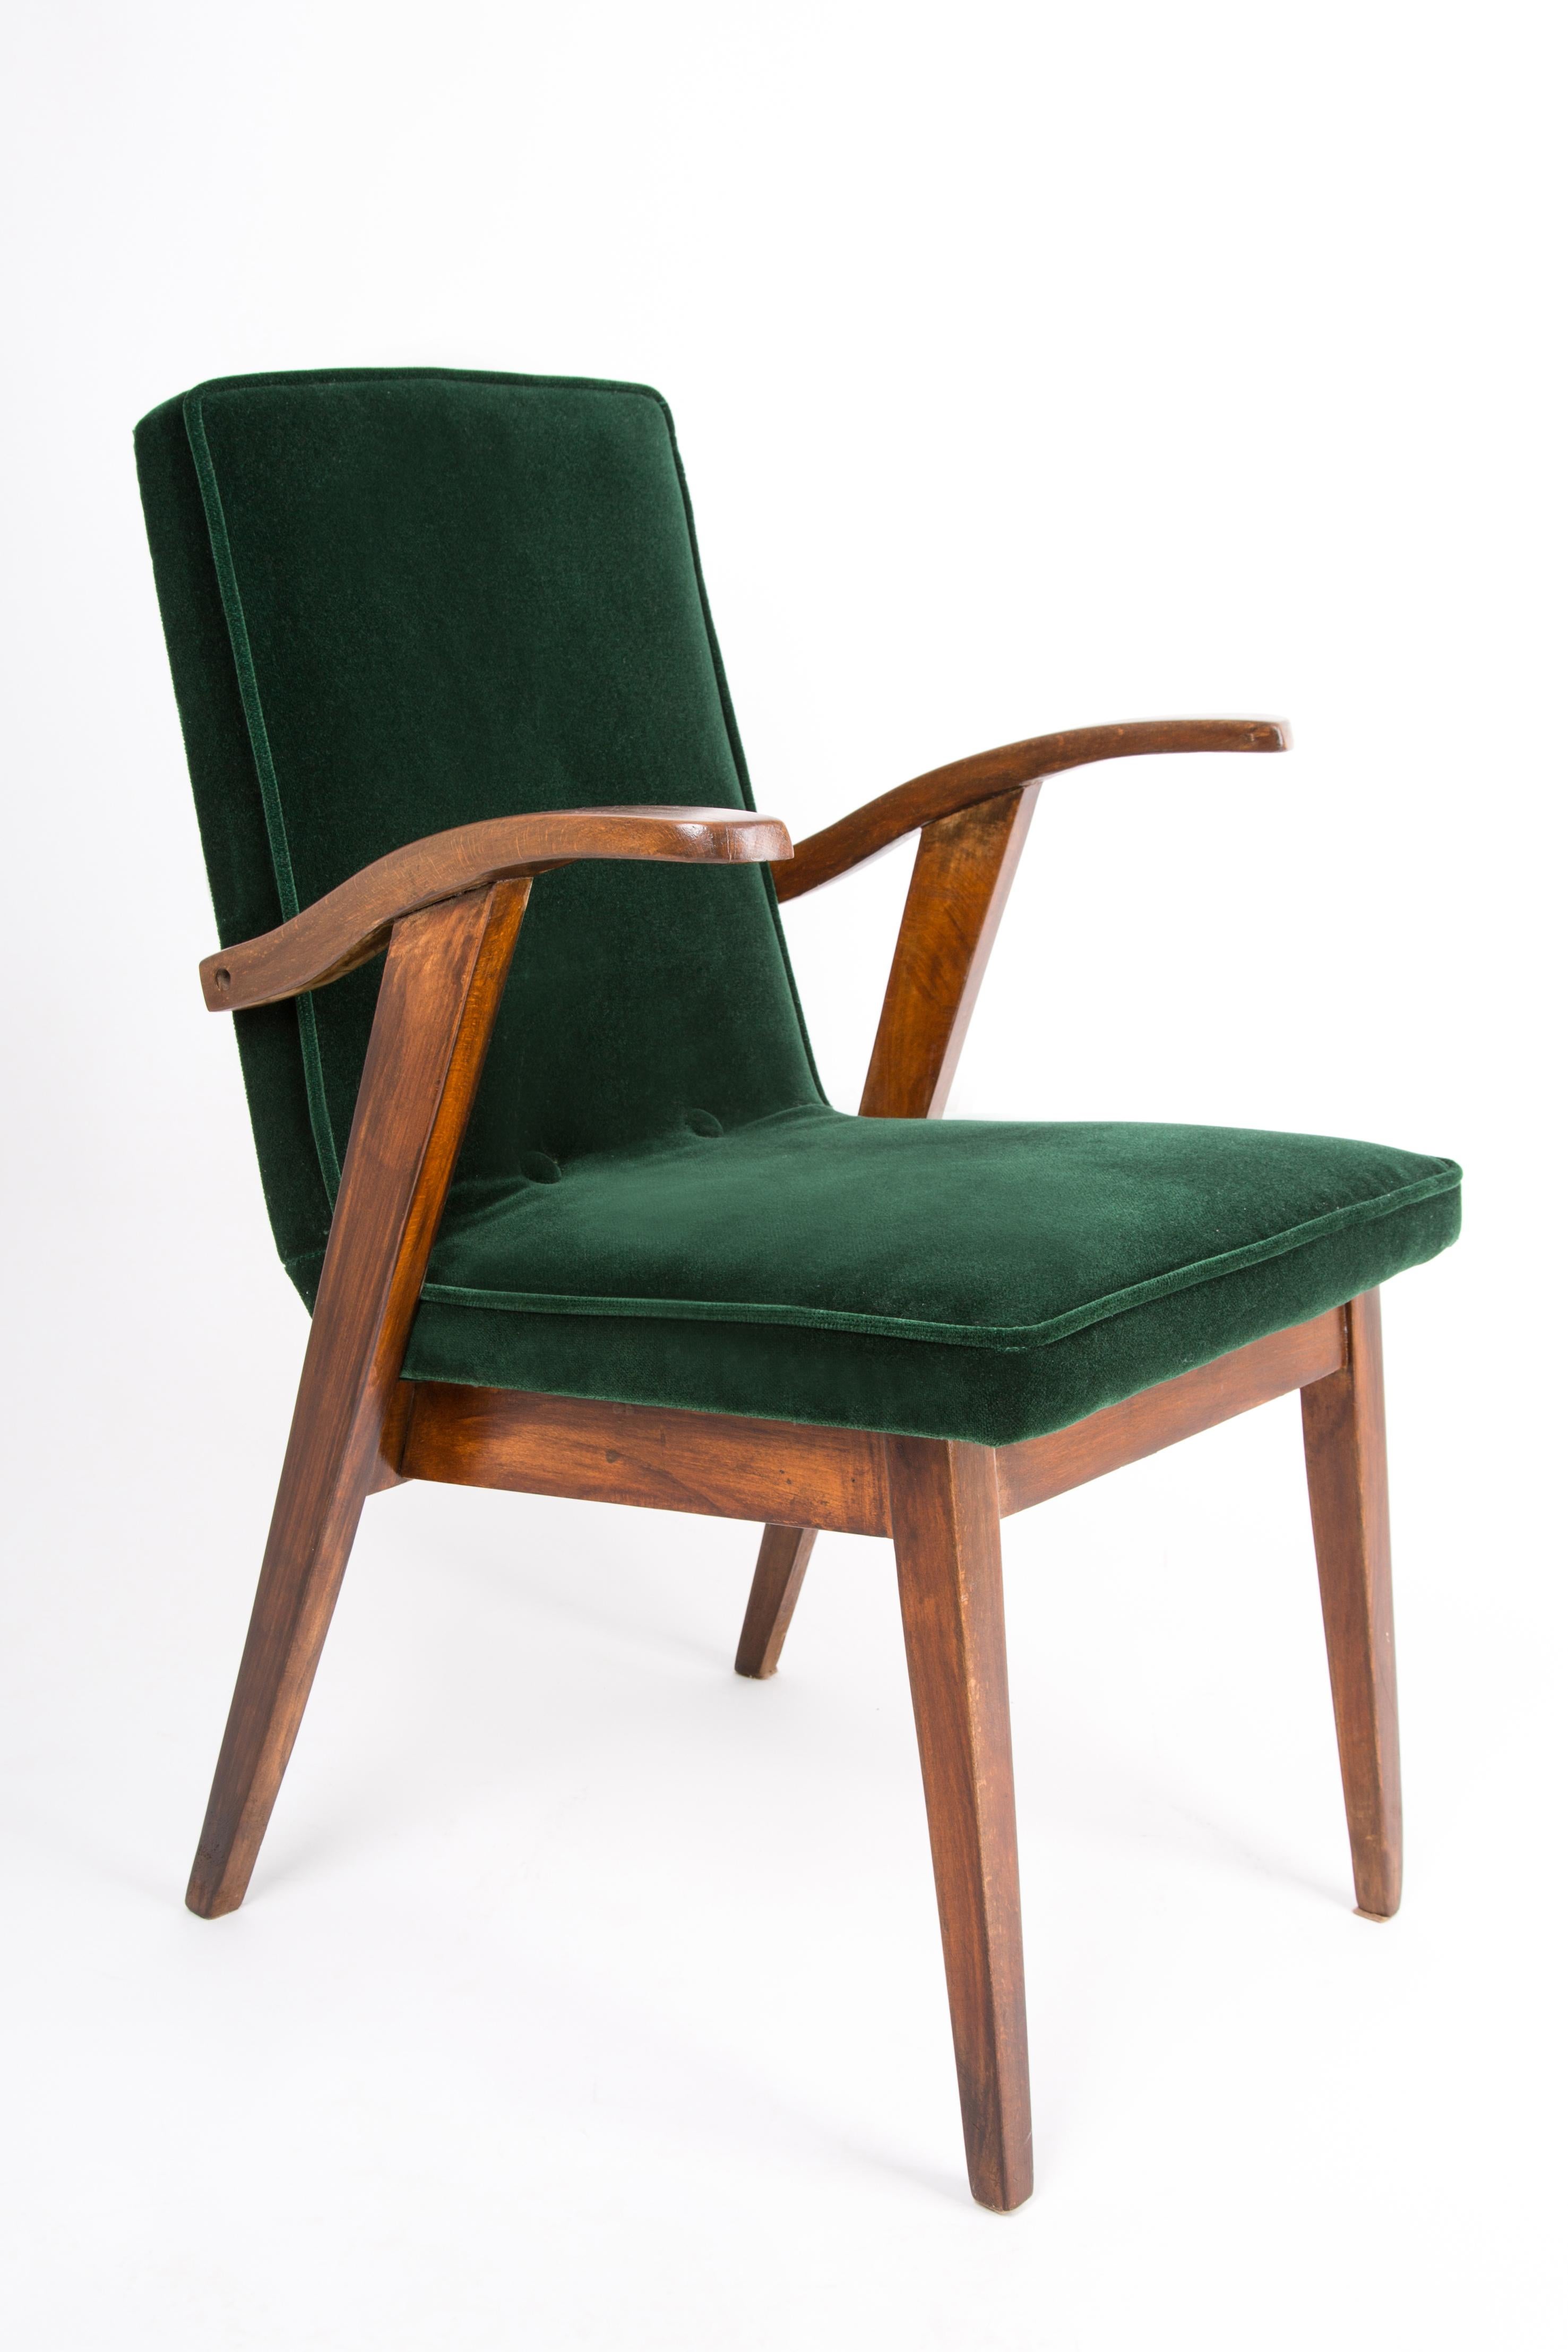 Armchair designed by Mieczyslaw Puchala in a classic edition. Dark wood combined with a green fabric gives it elegance and nobility. The chair has undergone a full carpentry and upholstery renovation. The wood is in excellent condition, finished